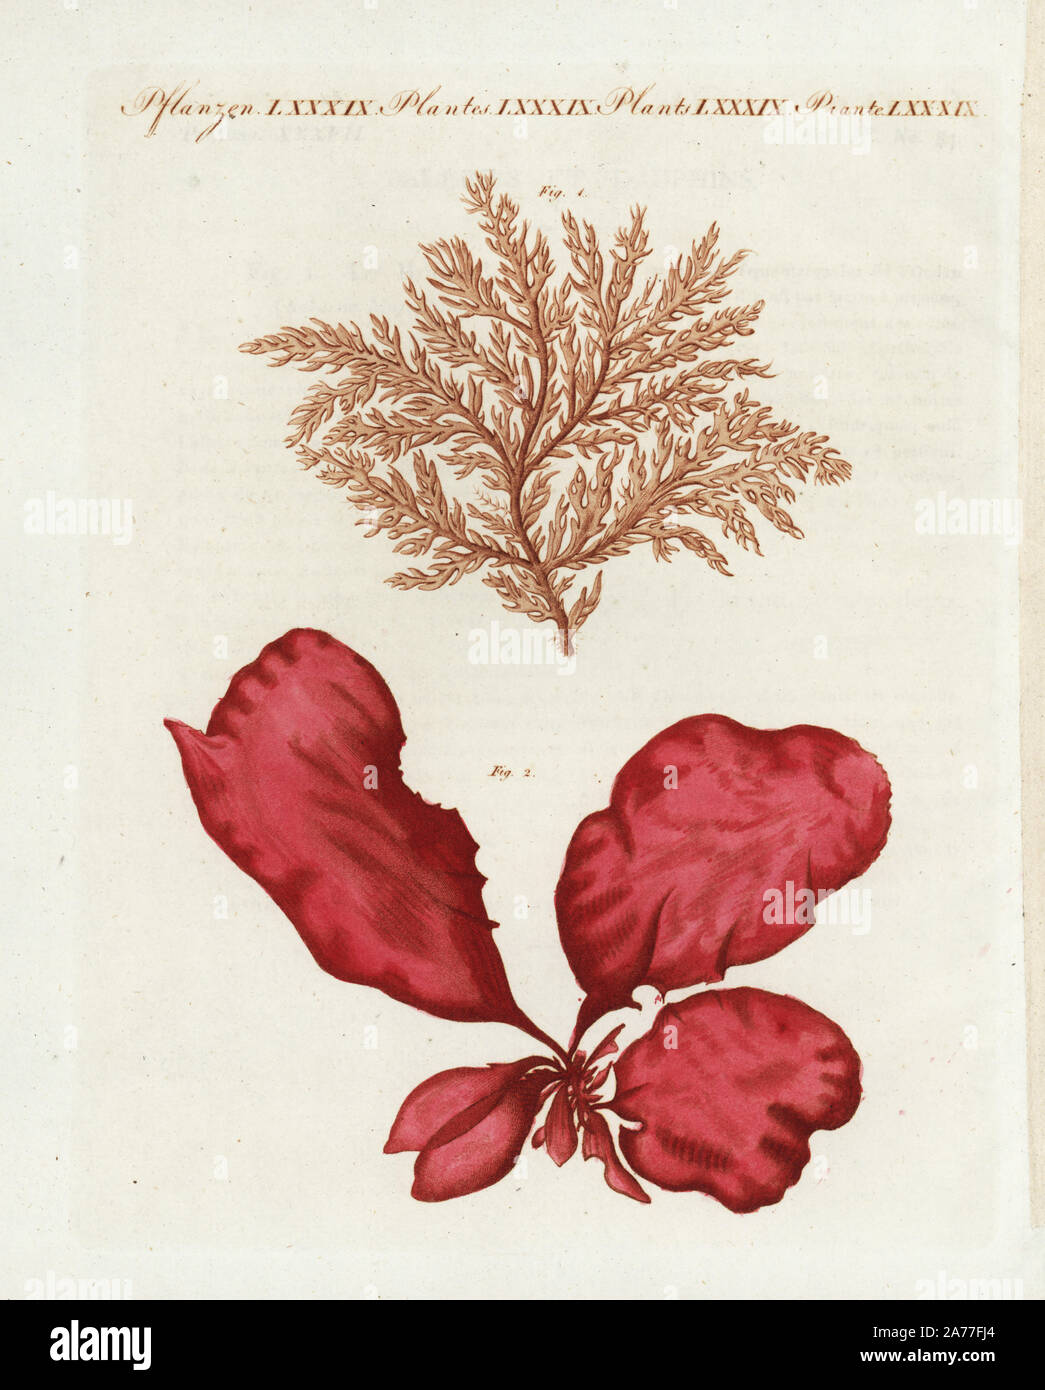 Red seaweed, Membranoptera alata 1, and sea lettuce, Fucus tremella var. lactuca 2. Handcoloured copperplate engraving from Friedrich Johann Bertuch's Bilderbuch fur Kinder (Picture Book for Children), Weimar, 1802. Stock Photo